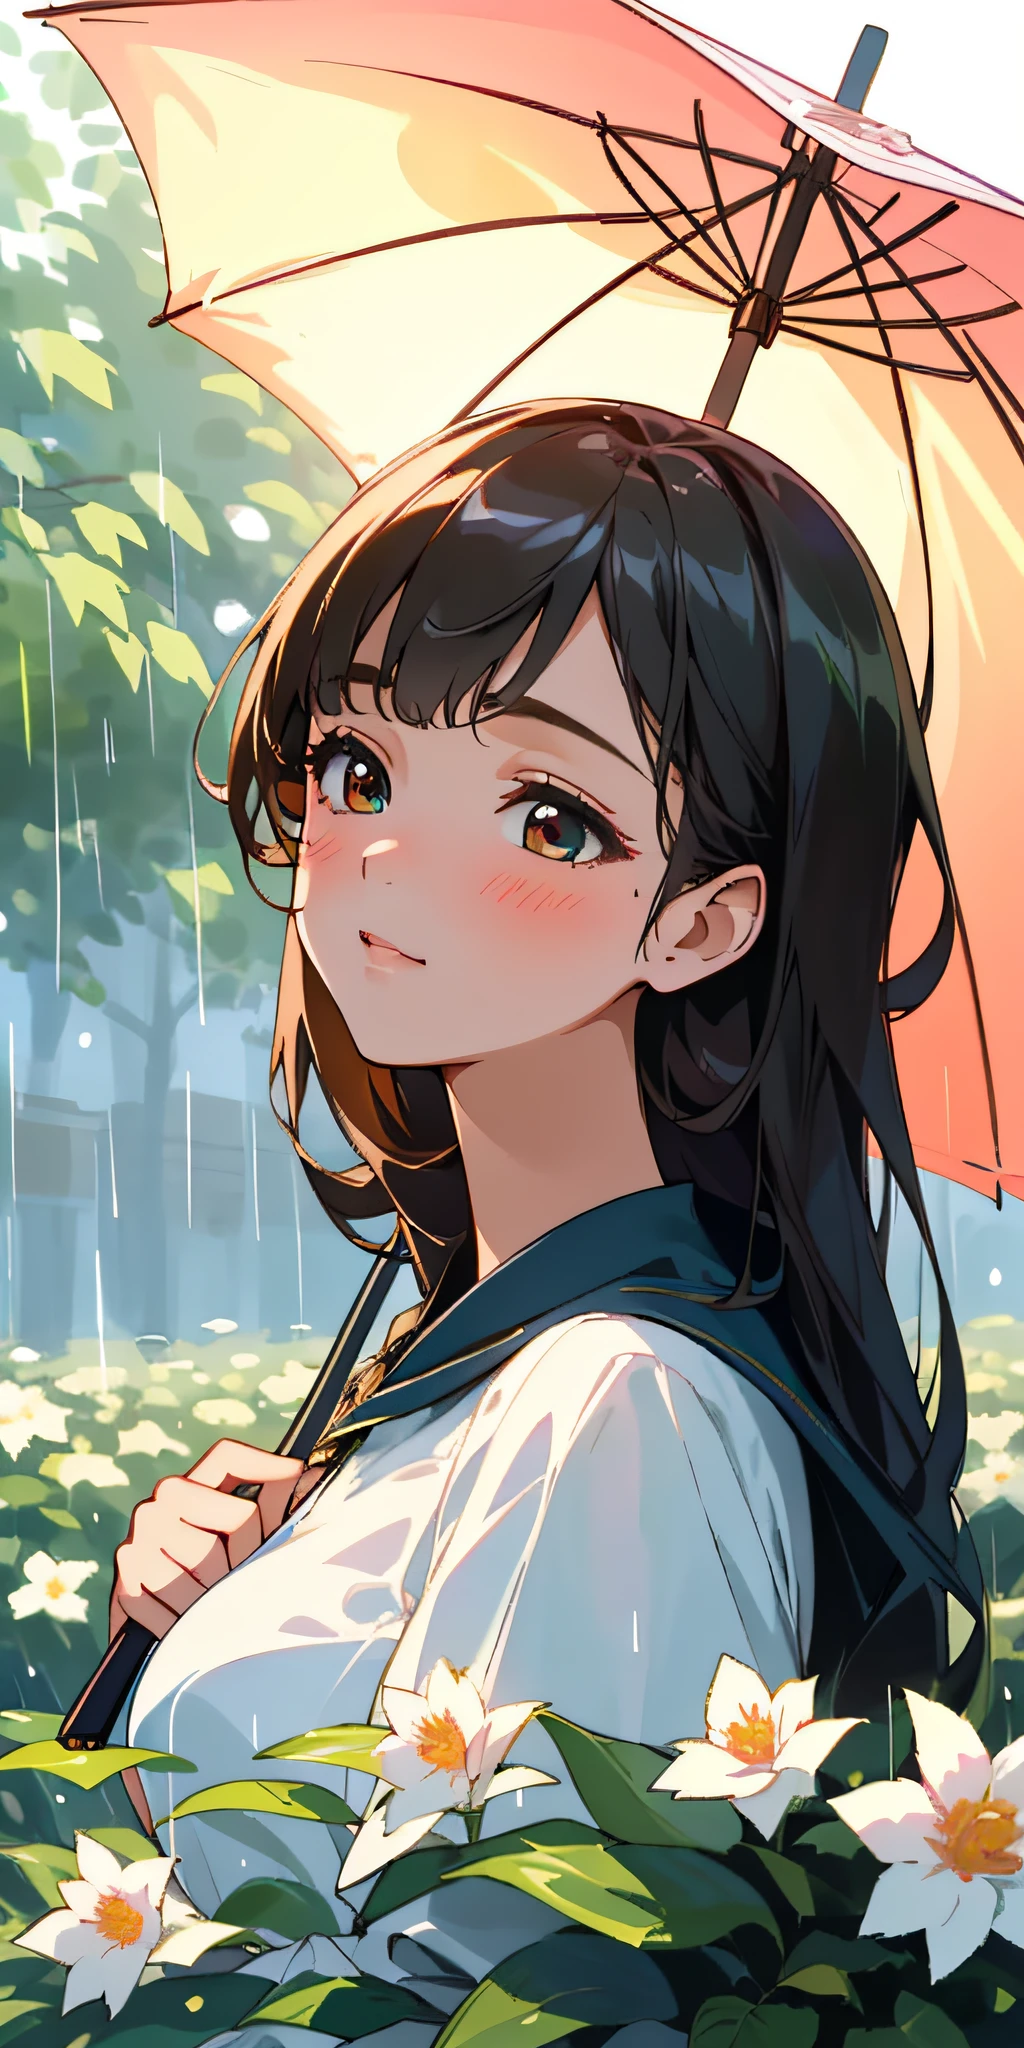 (best quality, masterpiece, ultra-realistic), portrait of 1 beautiful and delicate girl, with a soft and peaceful expression, holding an umbrella, the rainy background scenery is a garden with flowering bushes and butterflies flying around